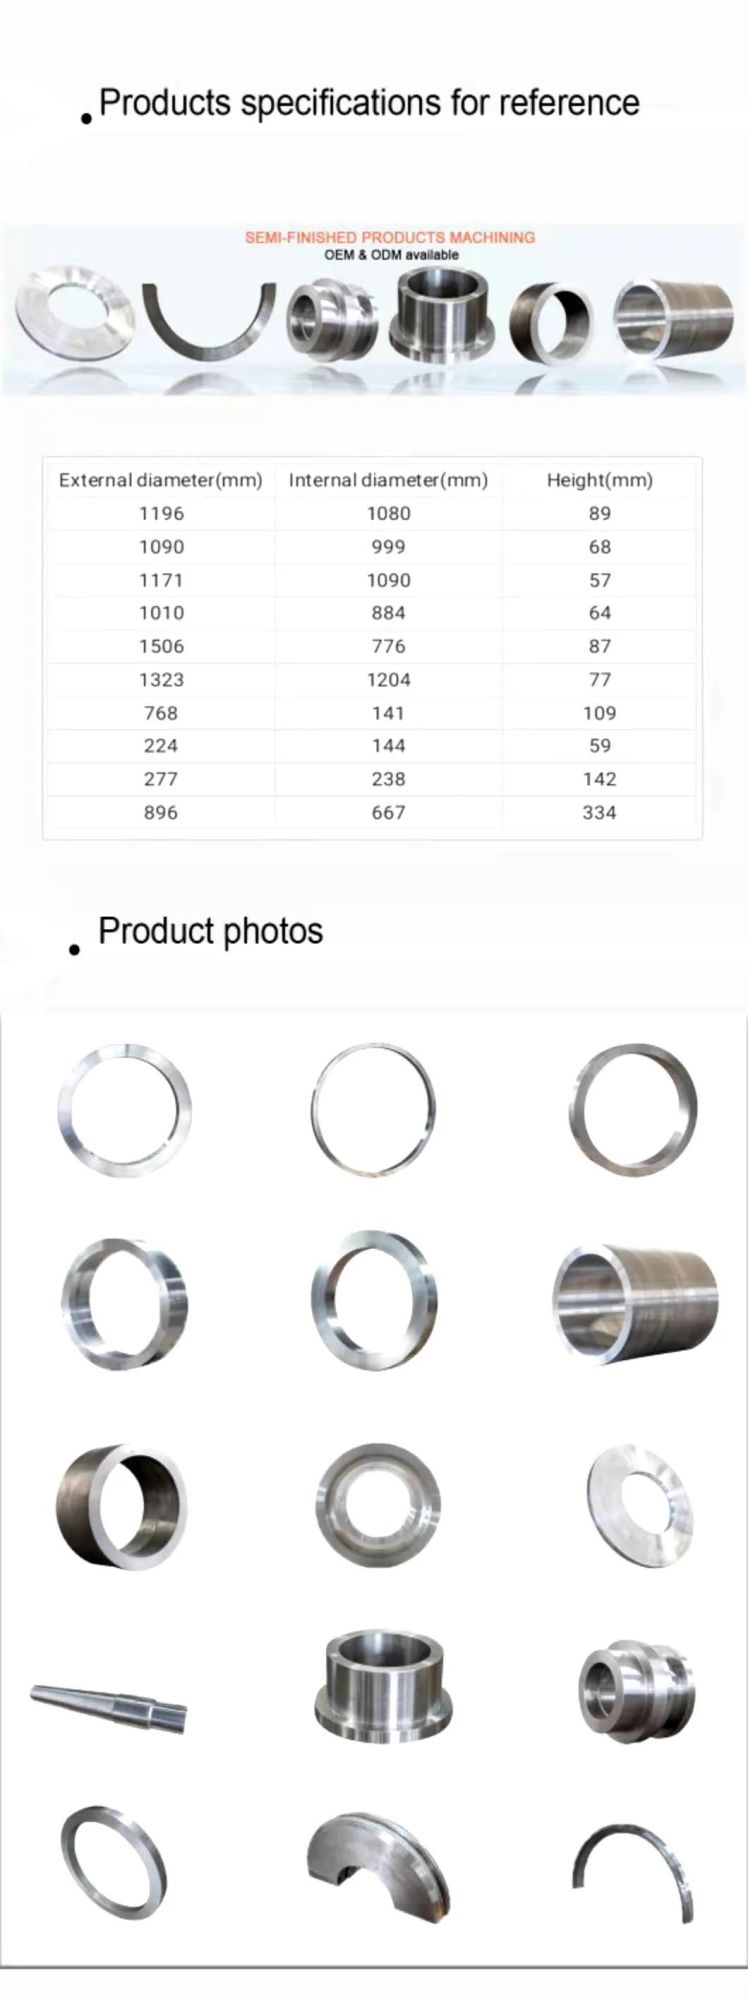 Alloy Steel, Forging Die Steel for Petroleum and Chemical Industry